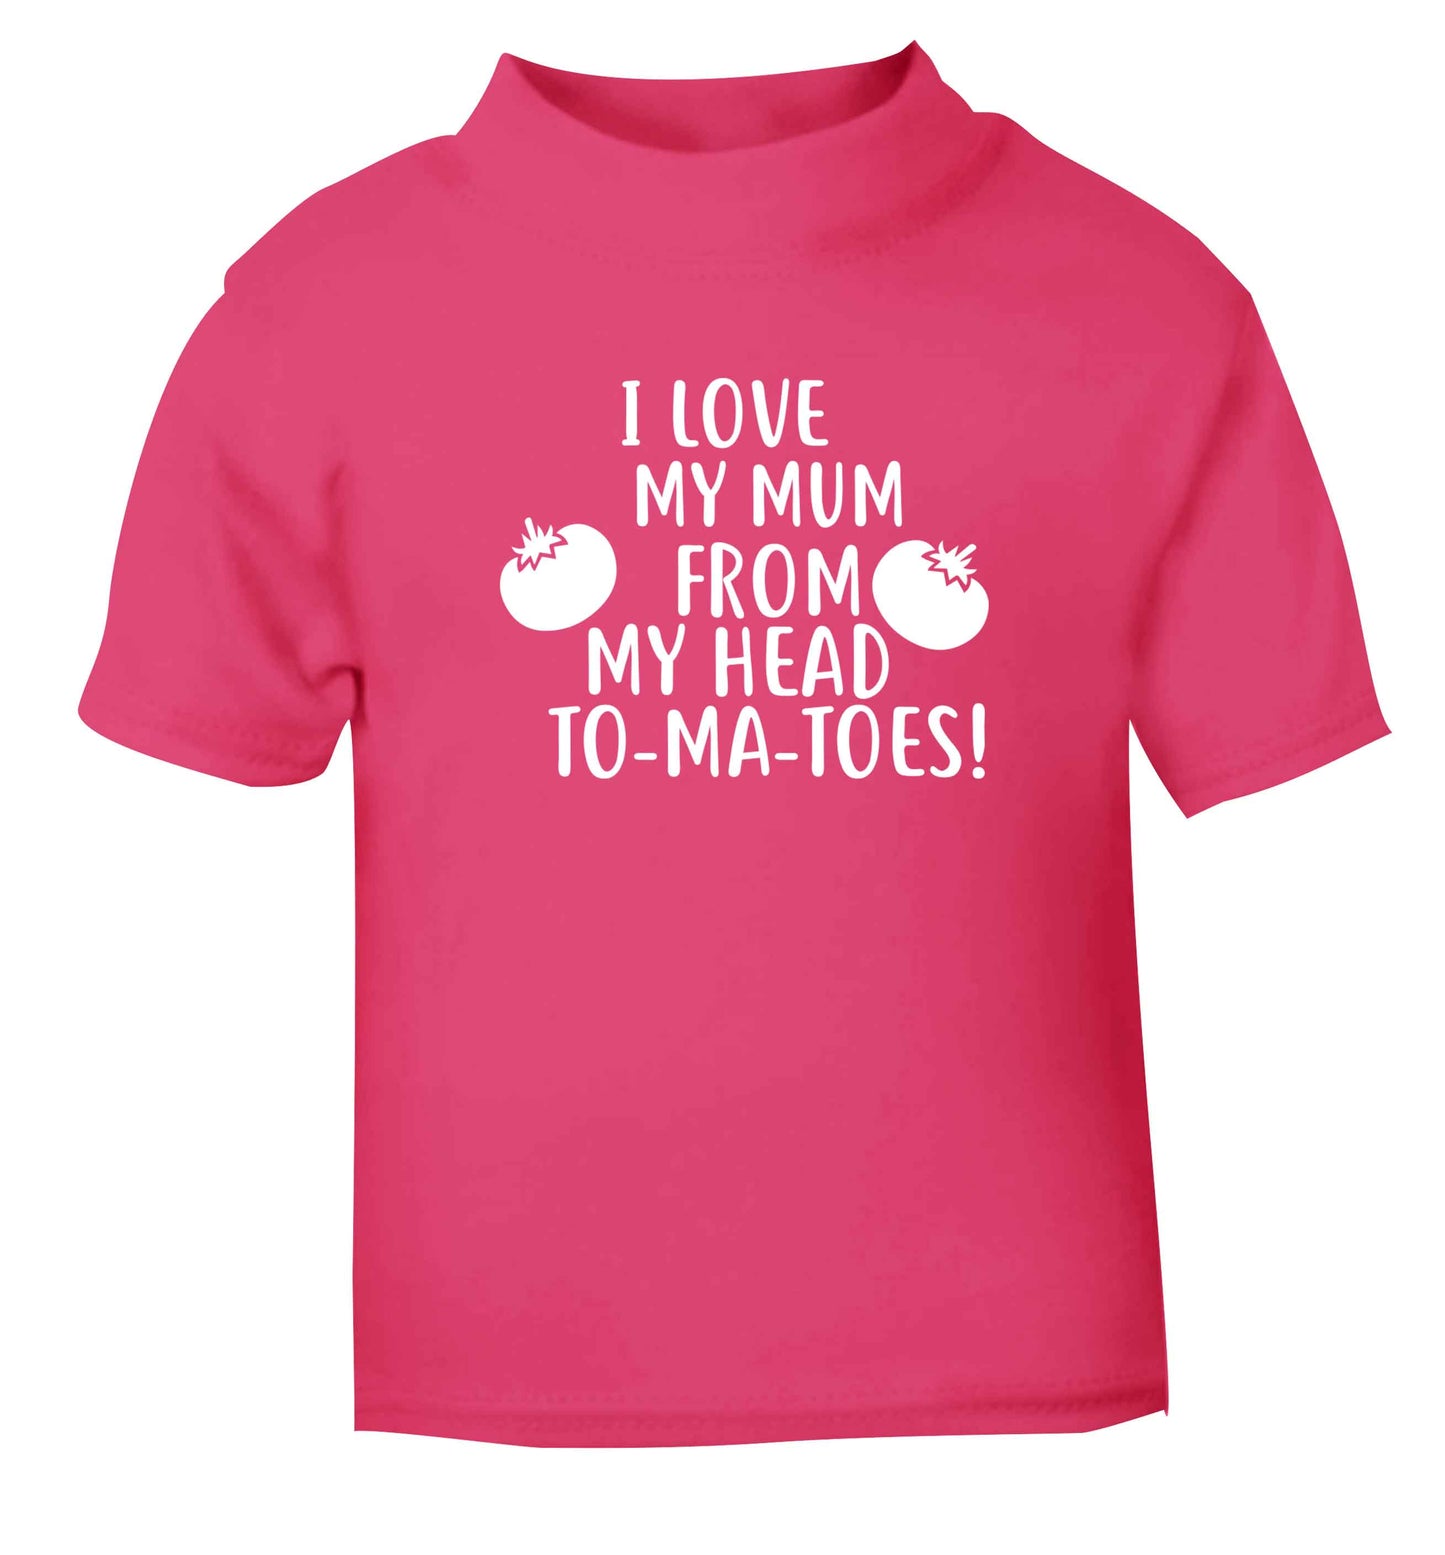 I love my mum from my head to-my-toes! pink baby toddler Tshirt 2 Years